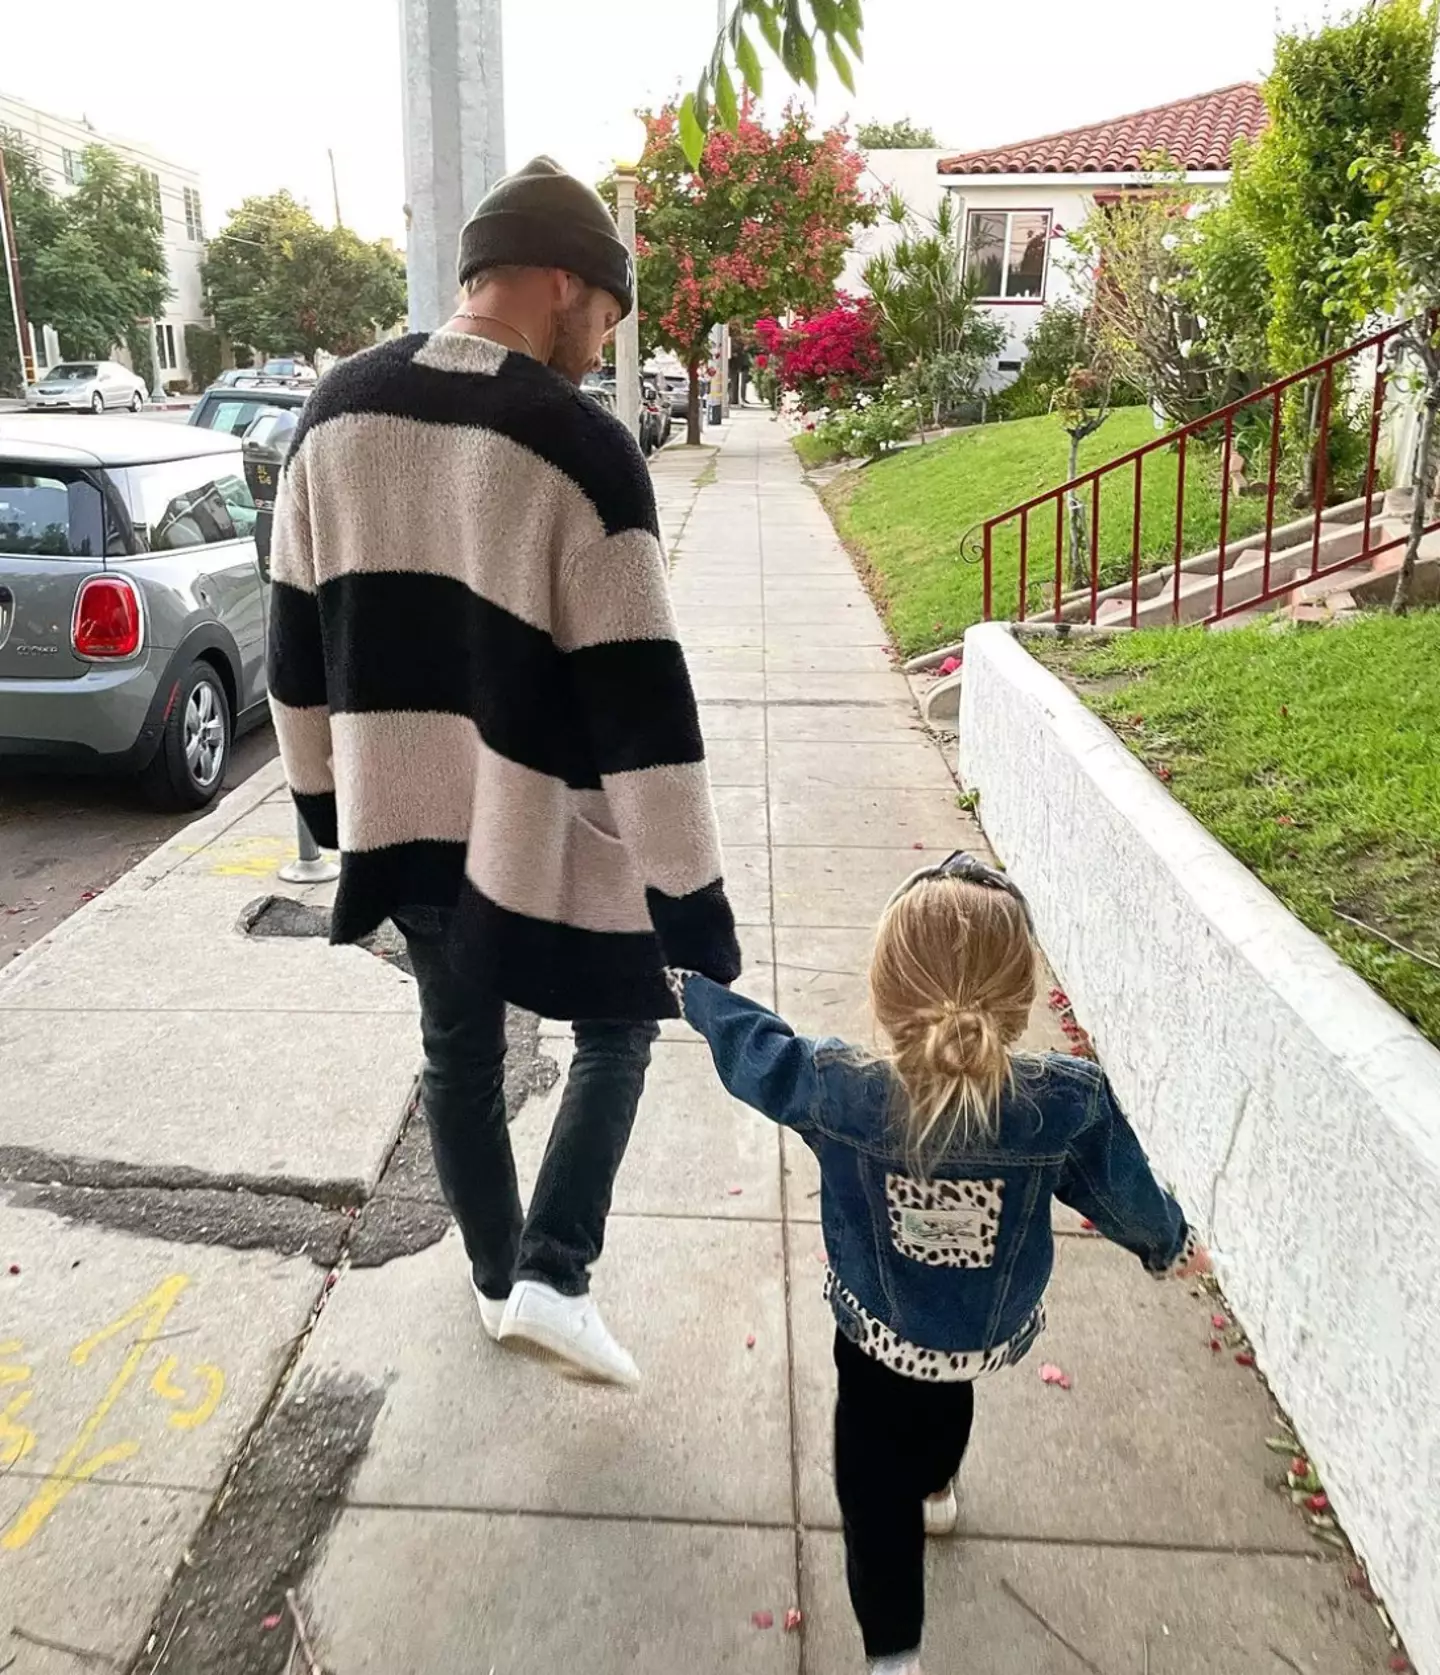 The actor and his wife, Lauren, already share a four-year-old daughter together.